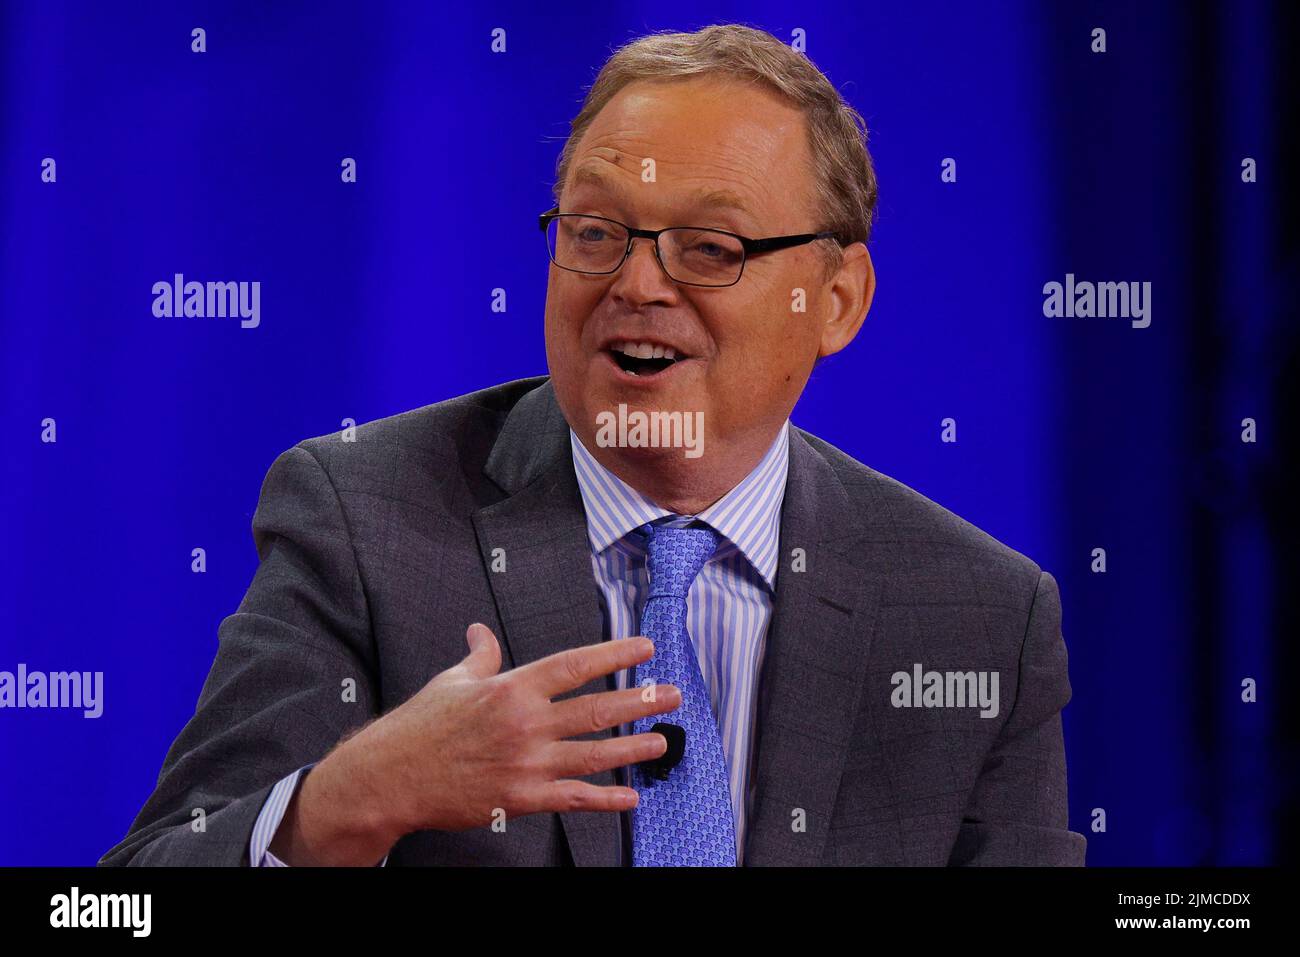 Kevin Hassett, former White House Chair of the Council of Economic Advisors, speaks at the Conservative Political Action Conference (CPAC) in Dallas, Texas, U.S., August 5, 2022.  REUTERS/Brian Snyder Stock Photo